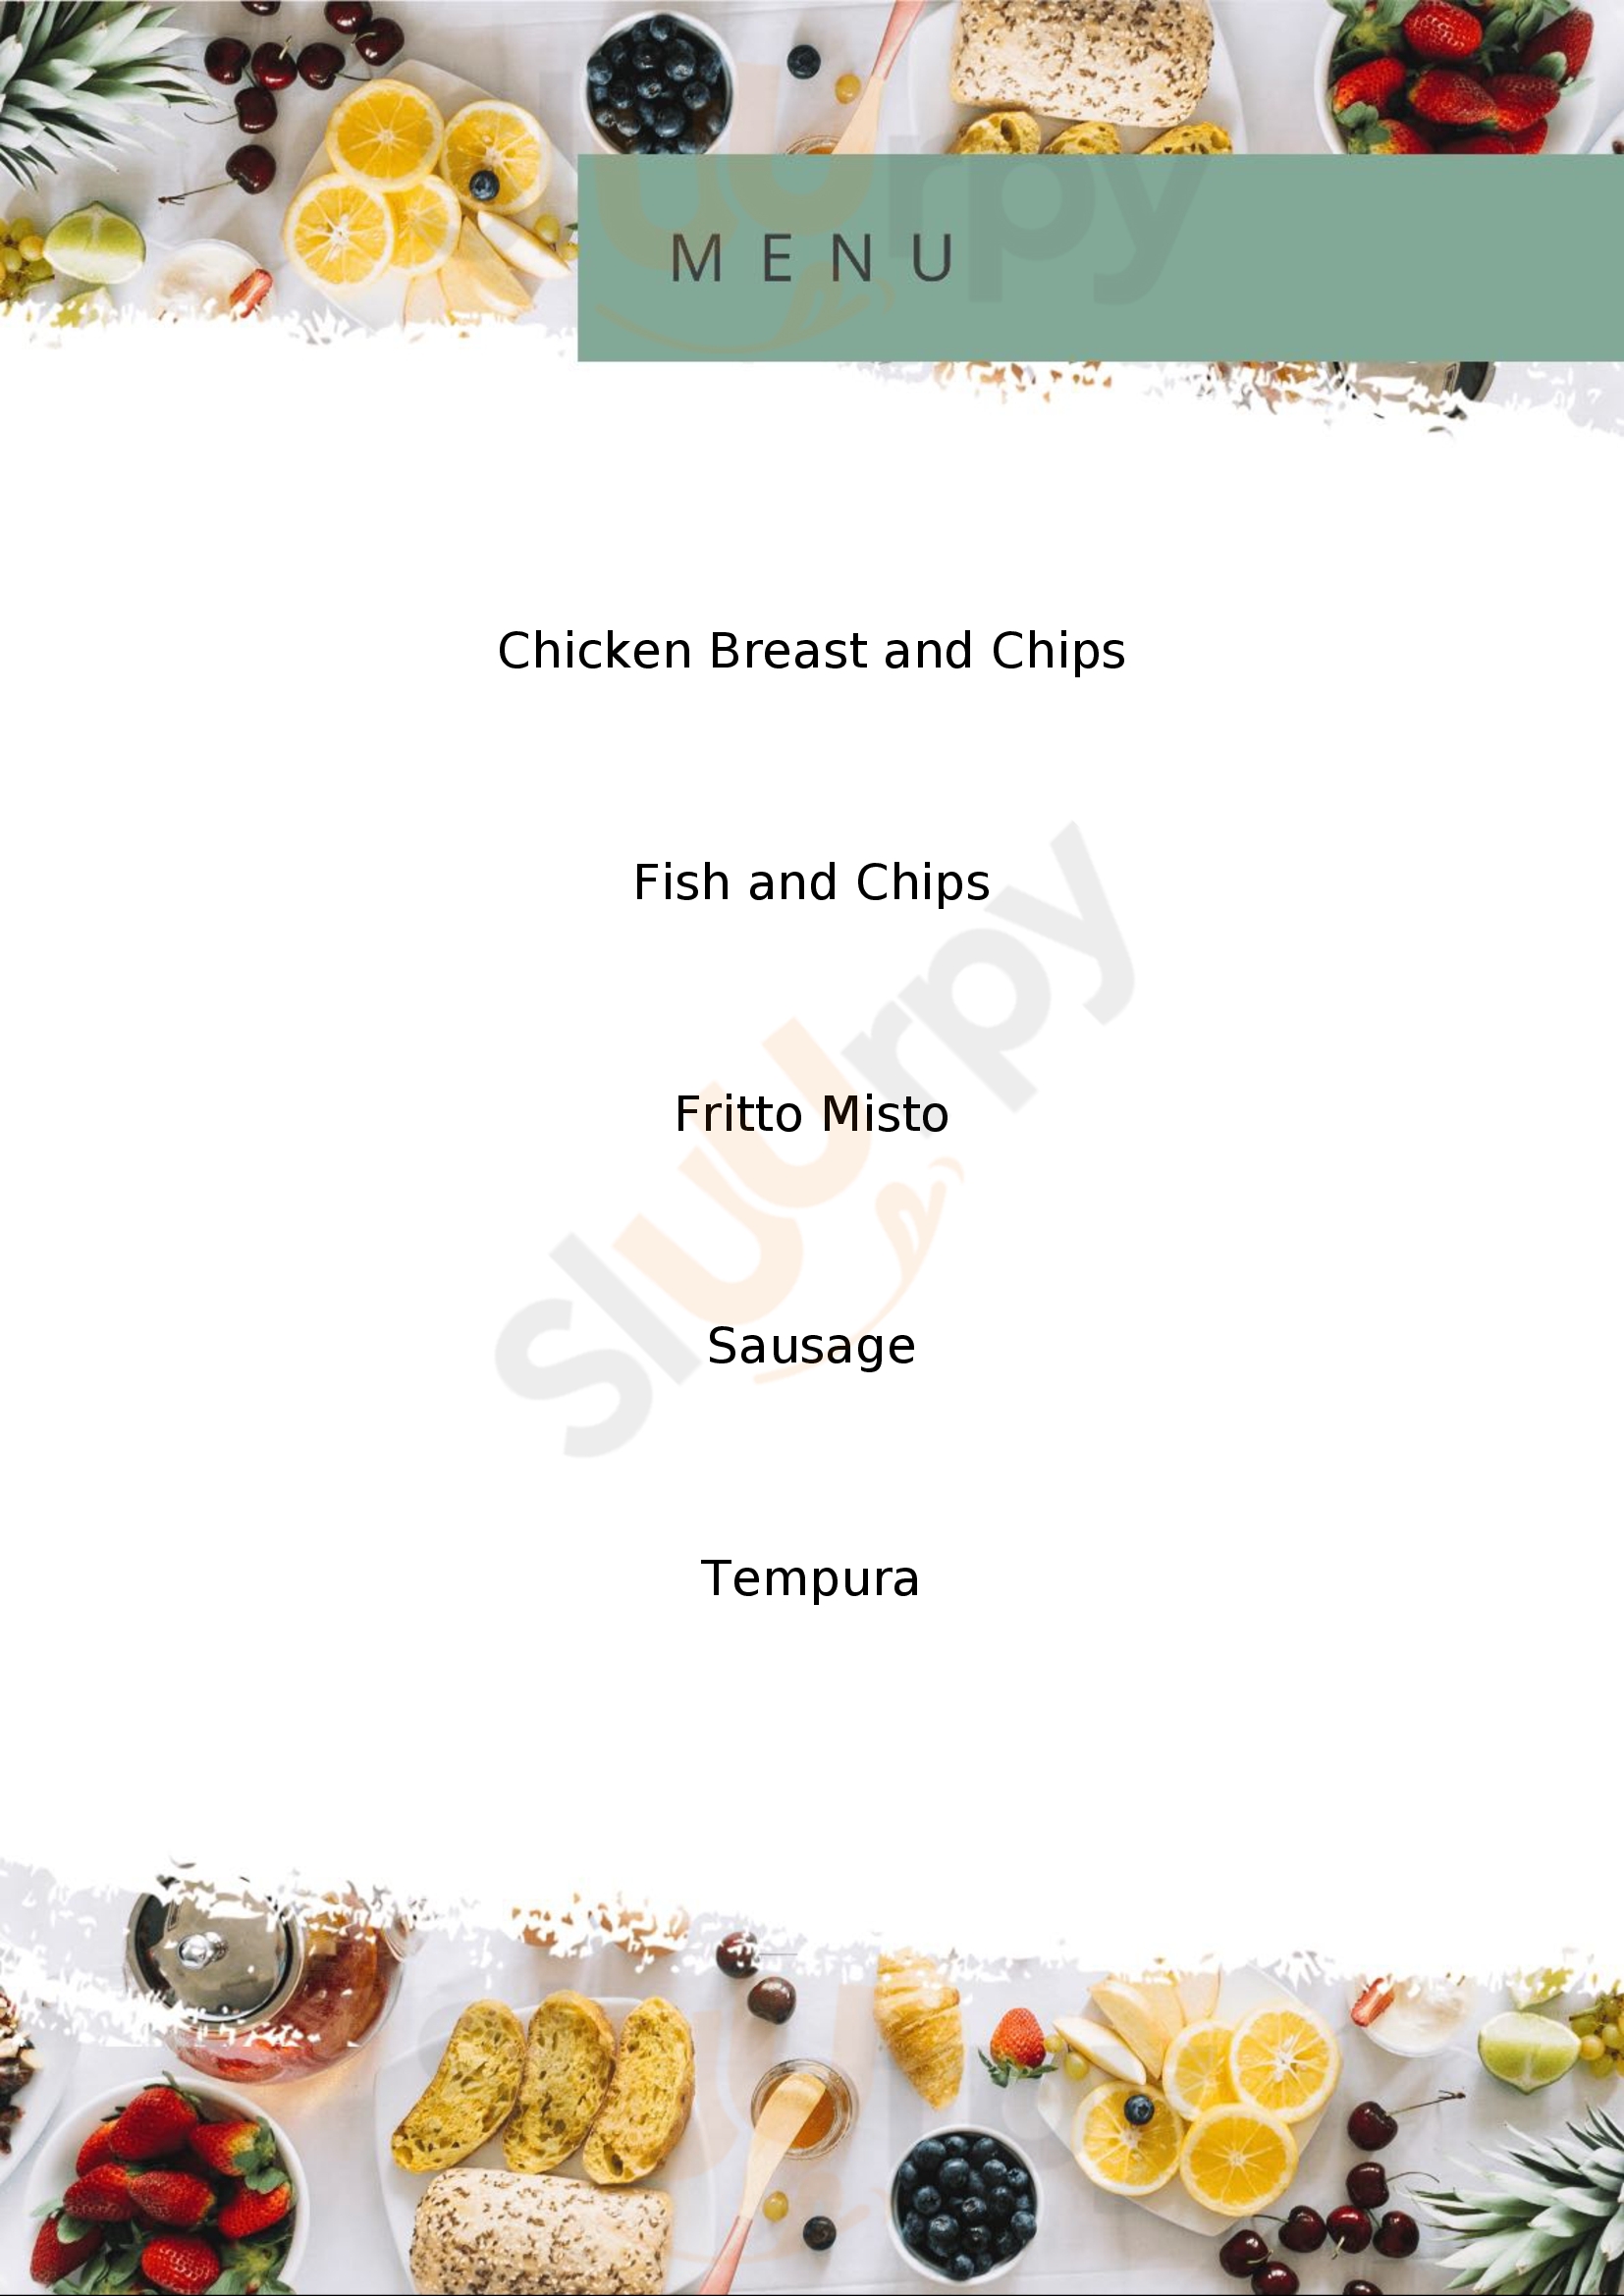 Sunny's Fish And Chips Bournemouth Menu - 1